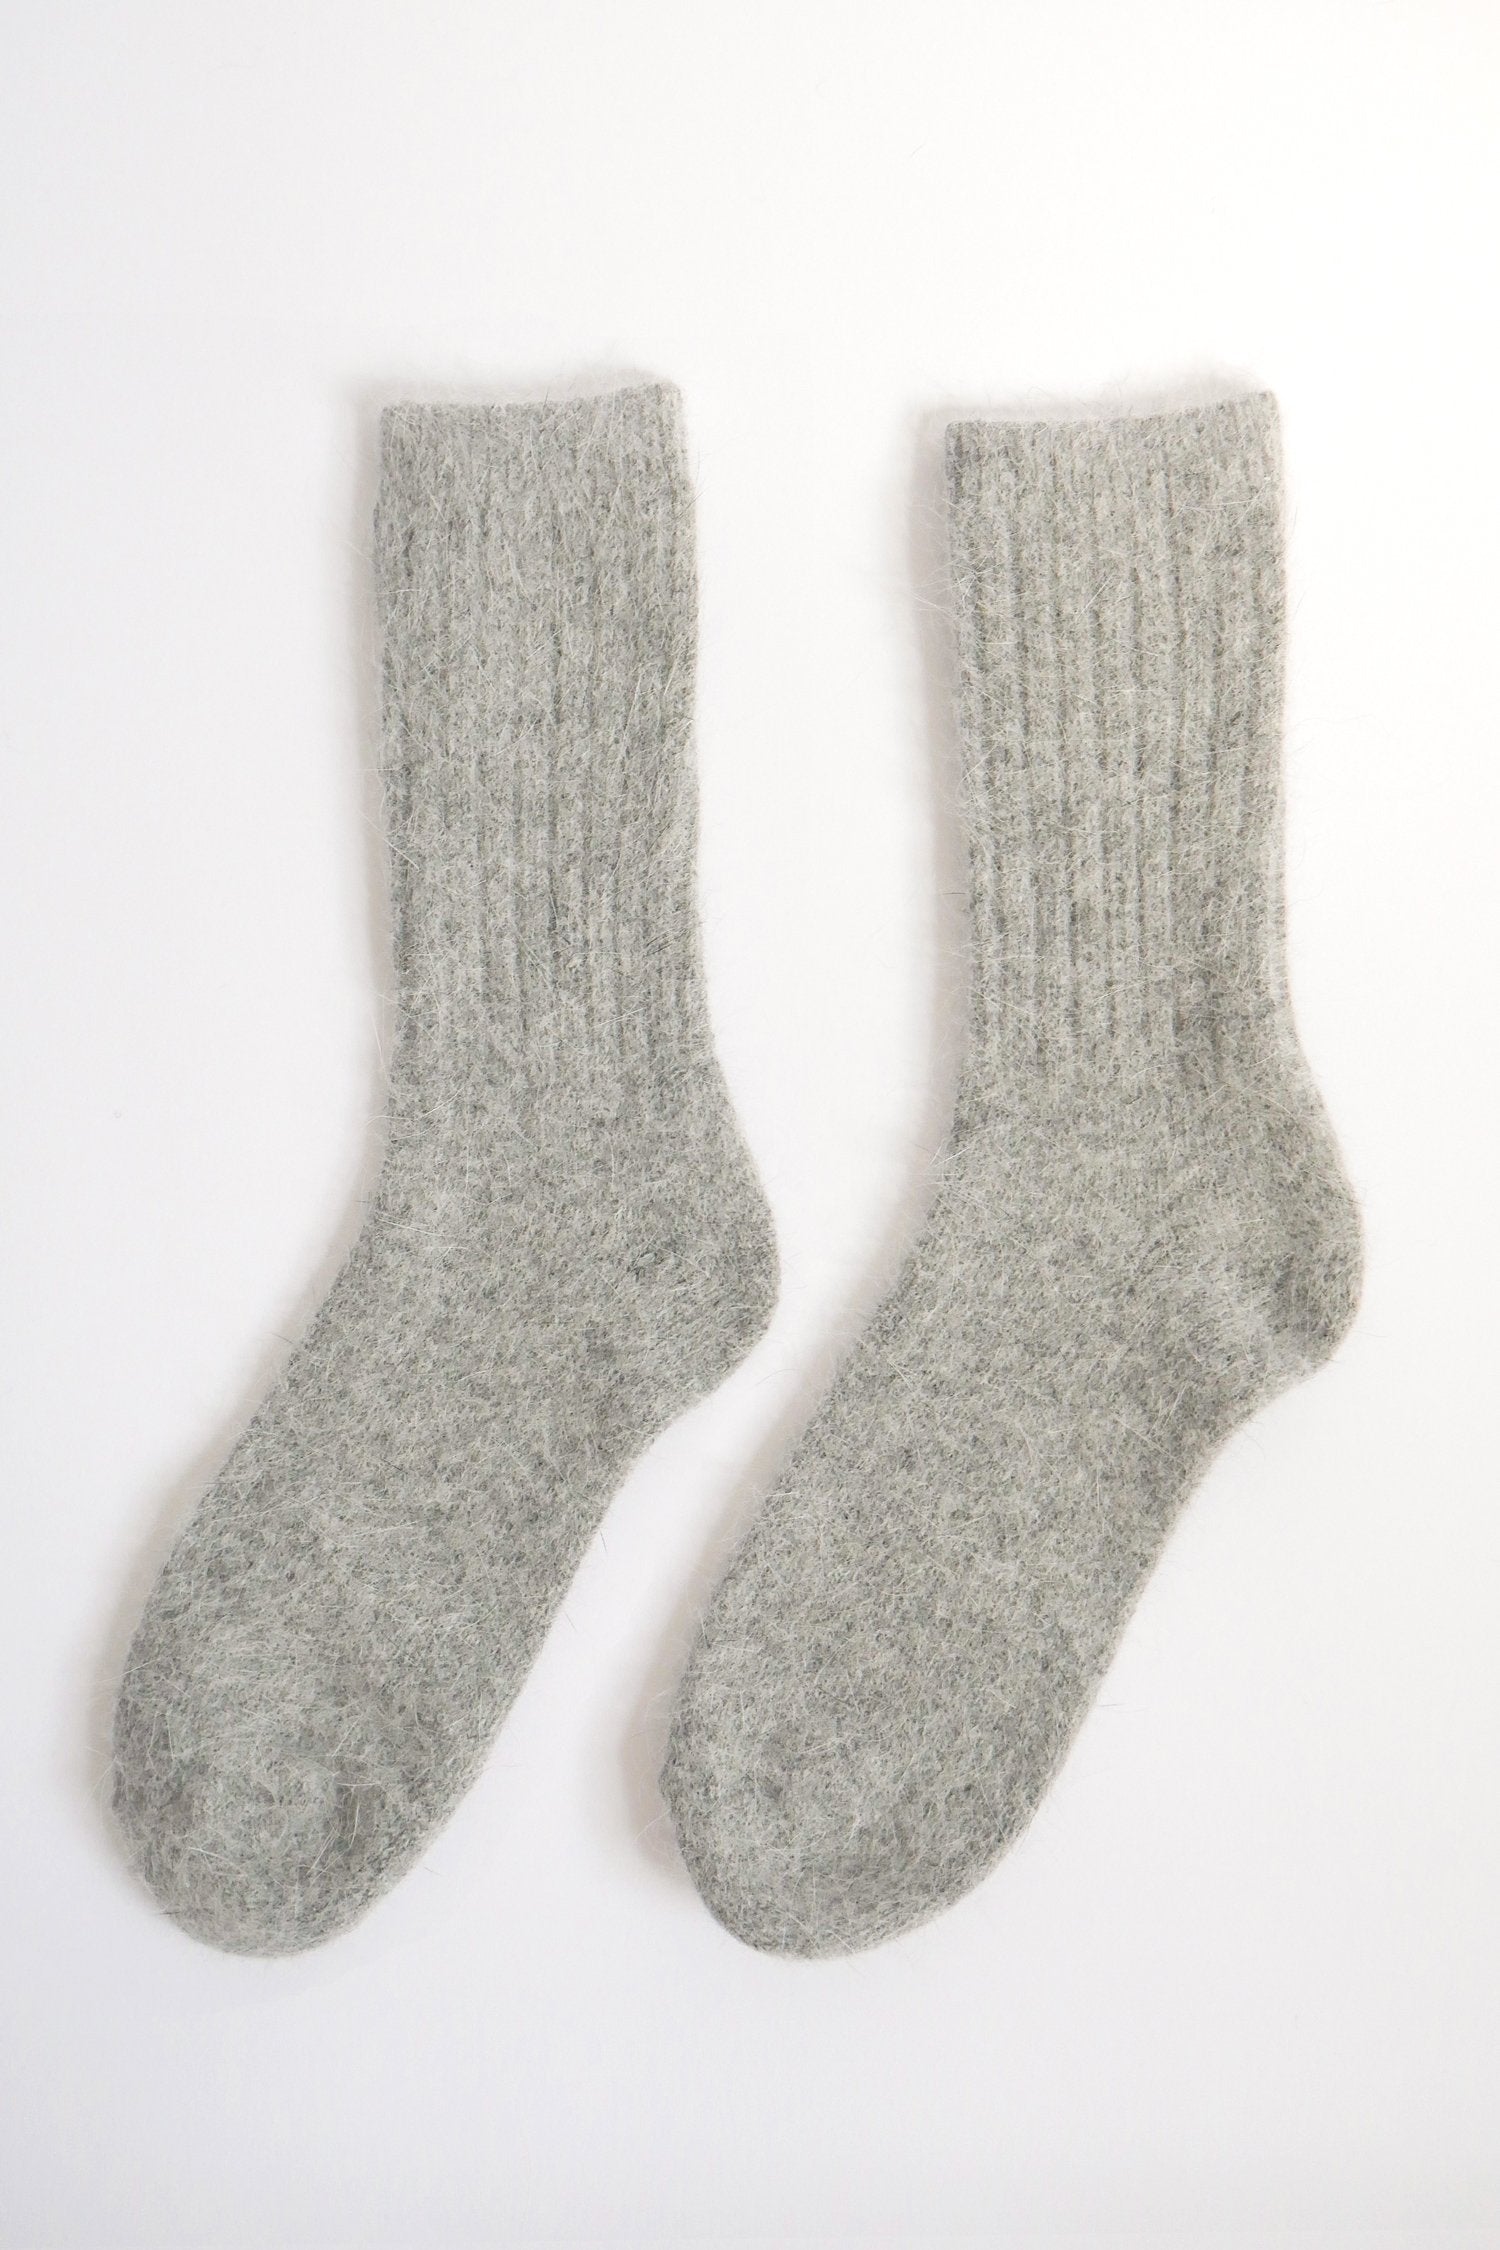 Skies For Miles soft Angora wool socks in grey color